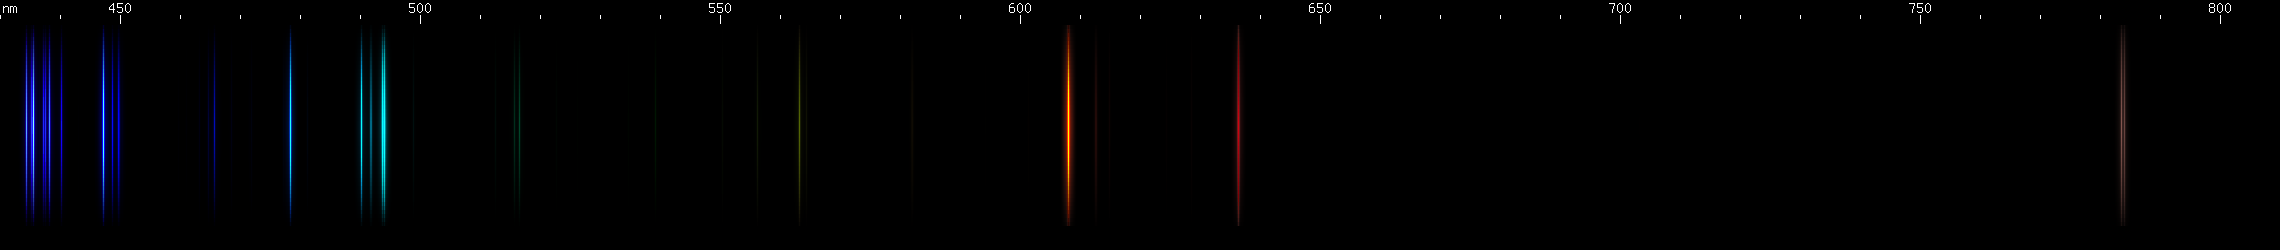 Spectral lines of Boron.